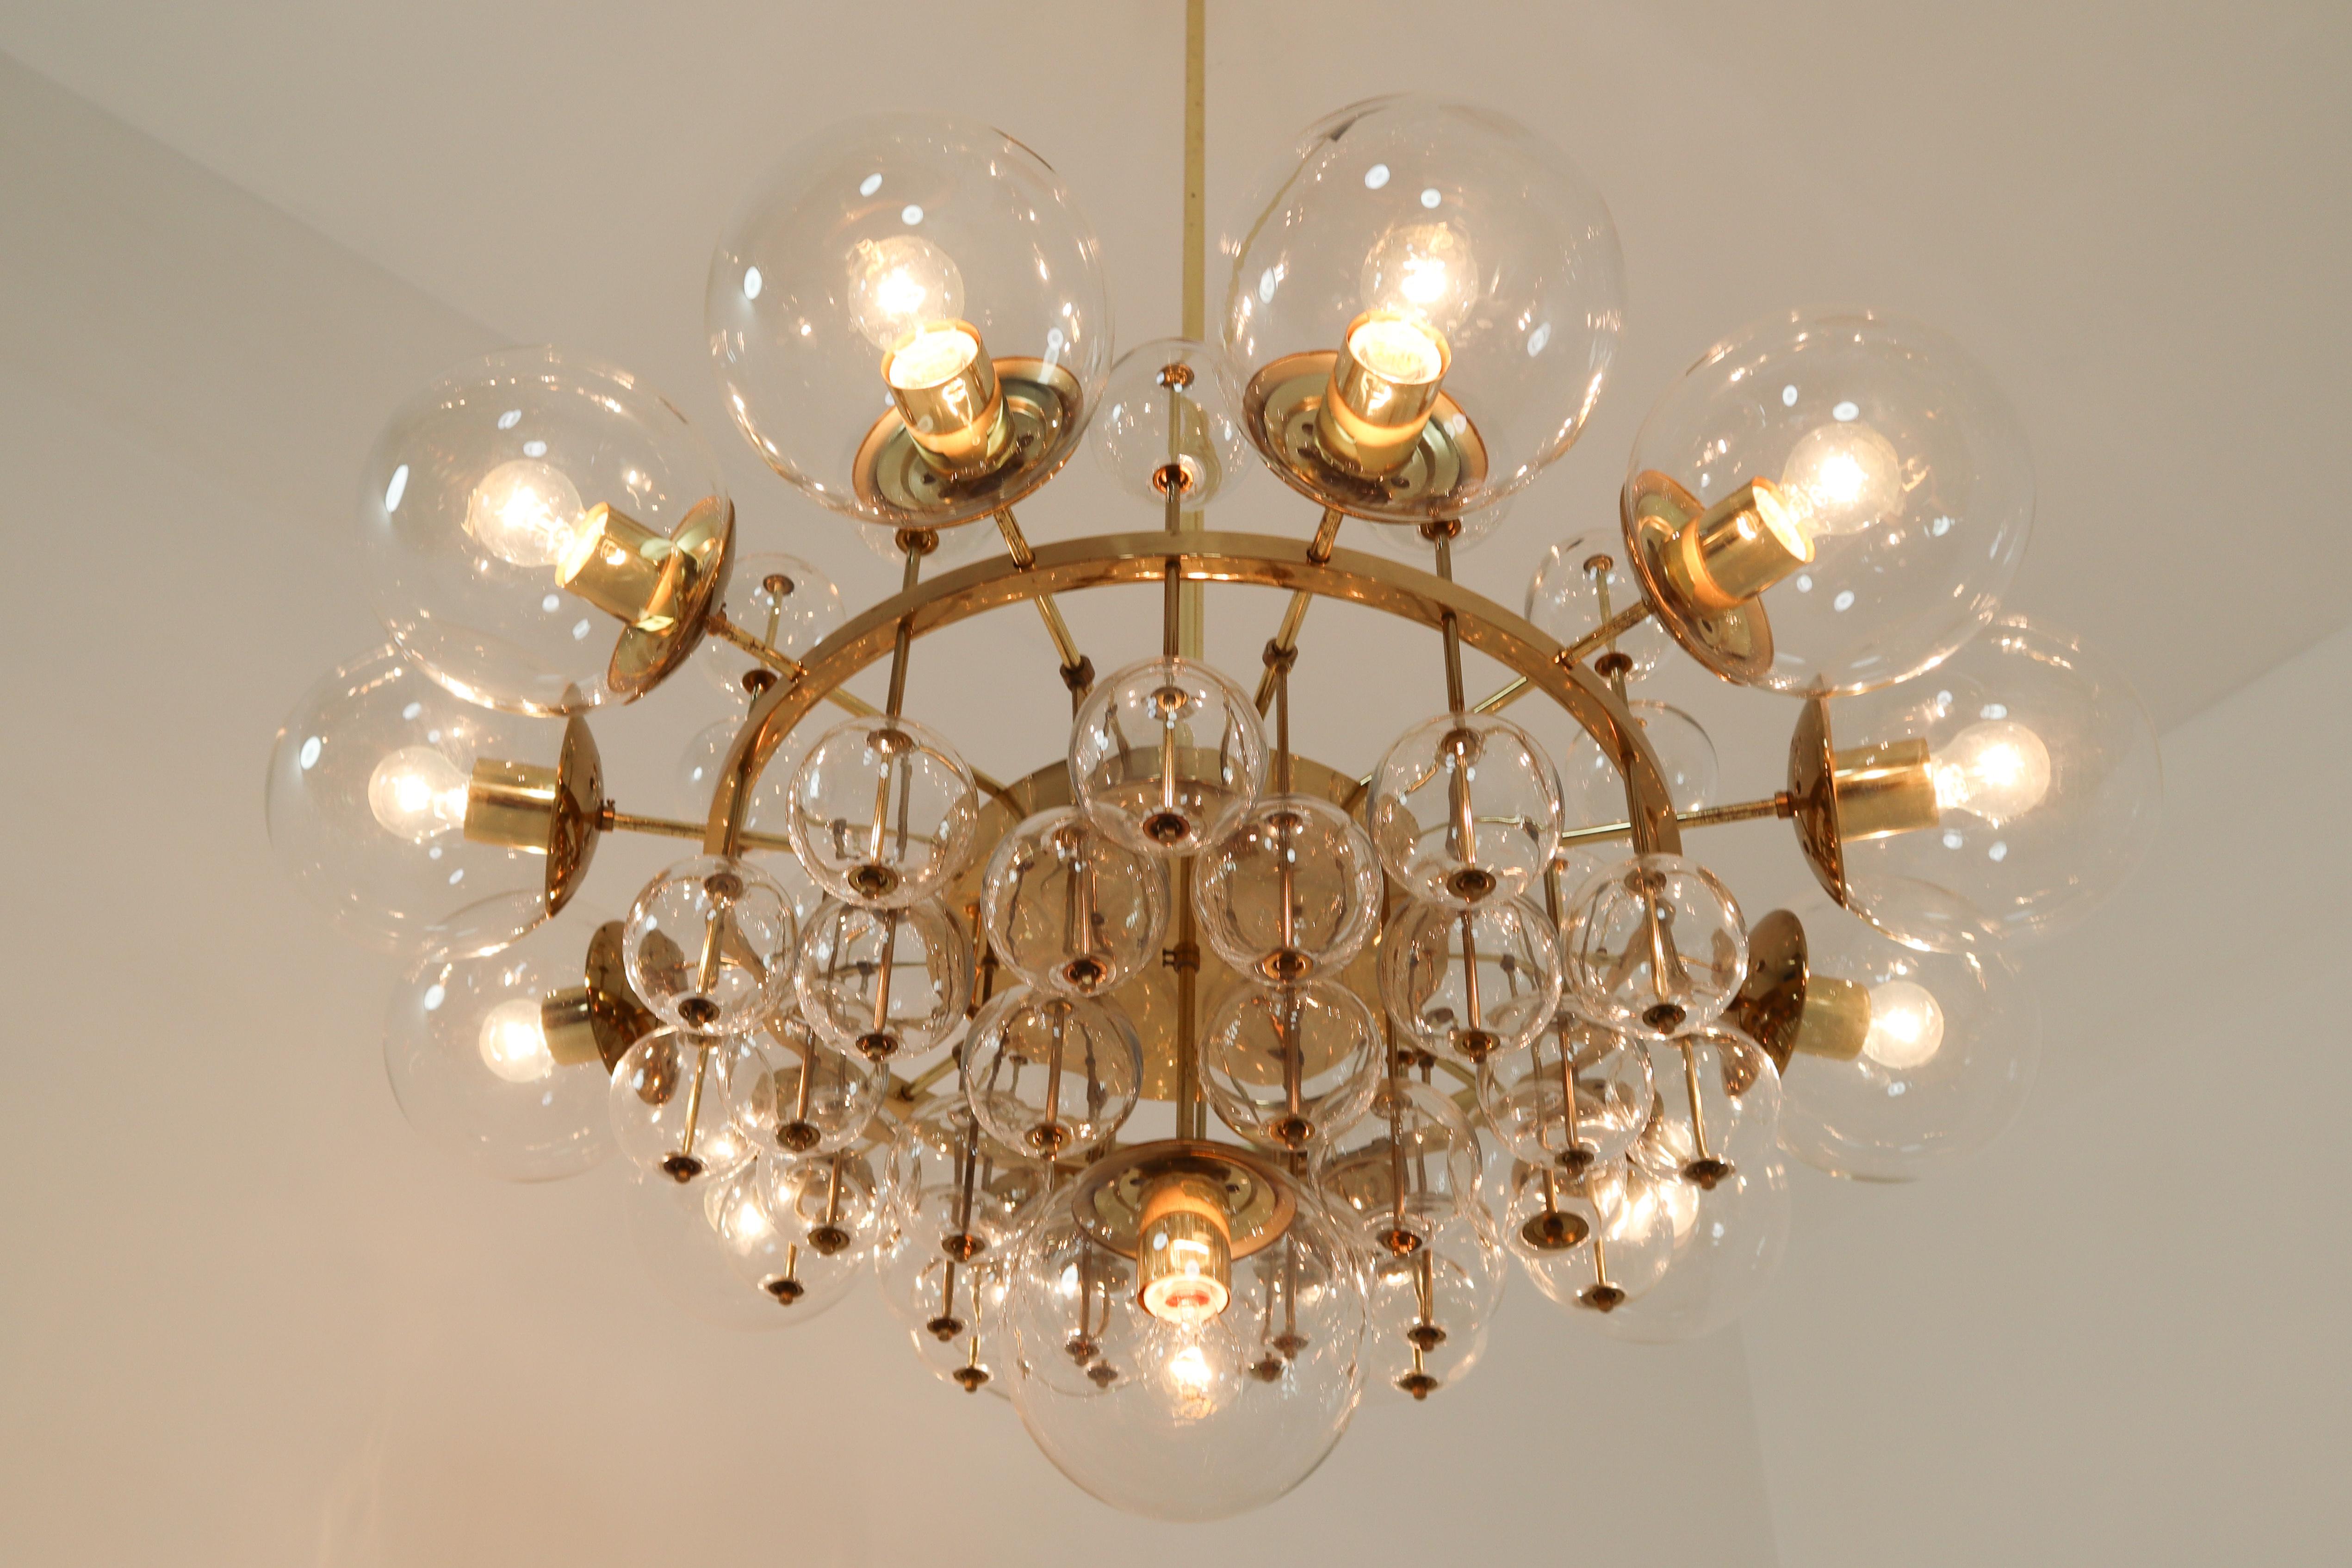 Midcentury Hotel Chandelier with Brass Fixture and Hand-Blowed Glass Globes 3